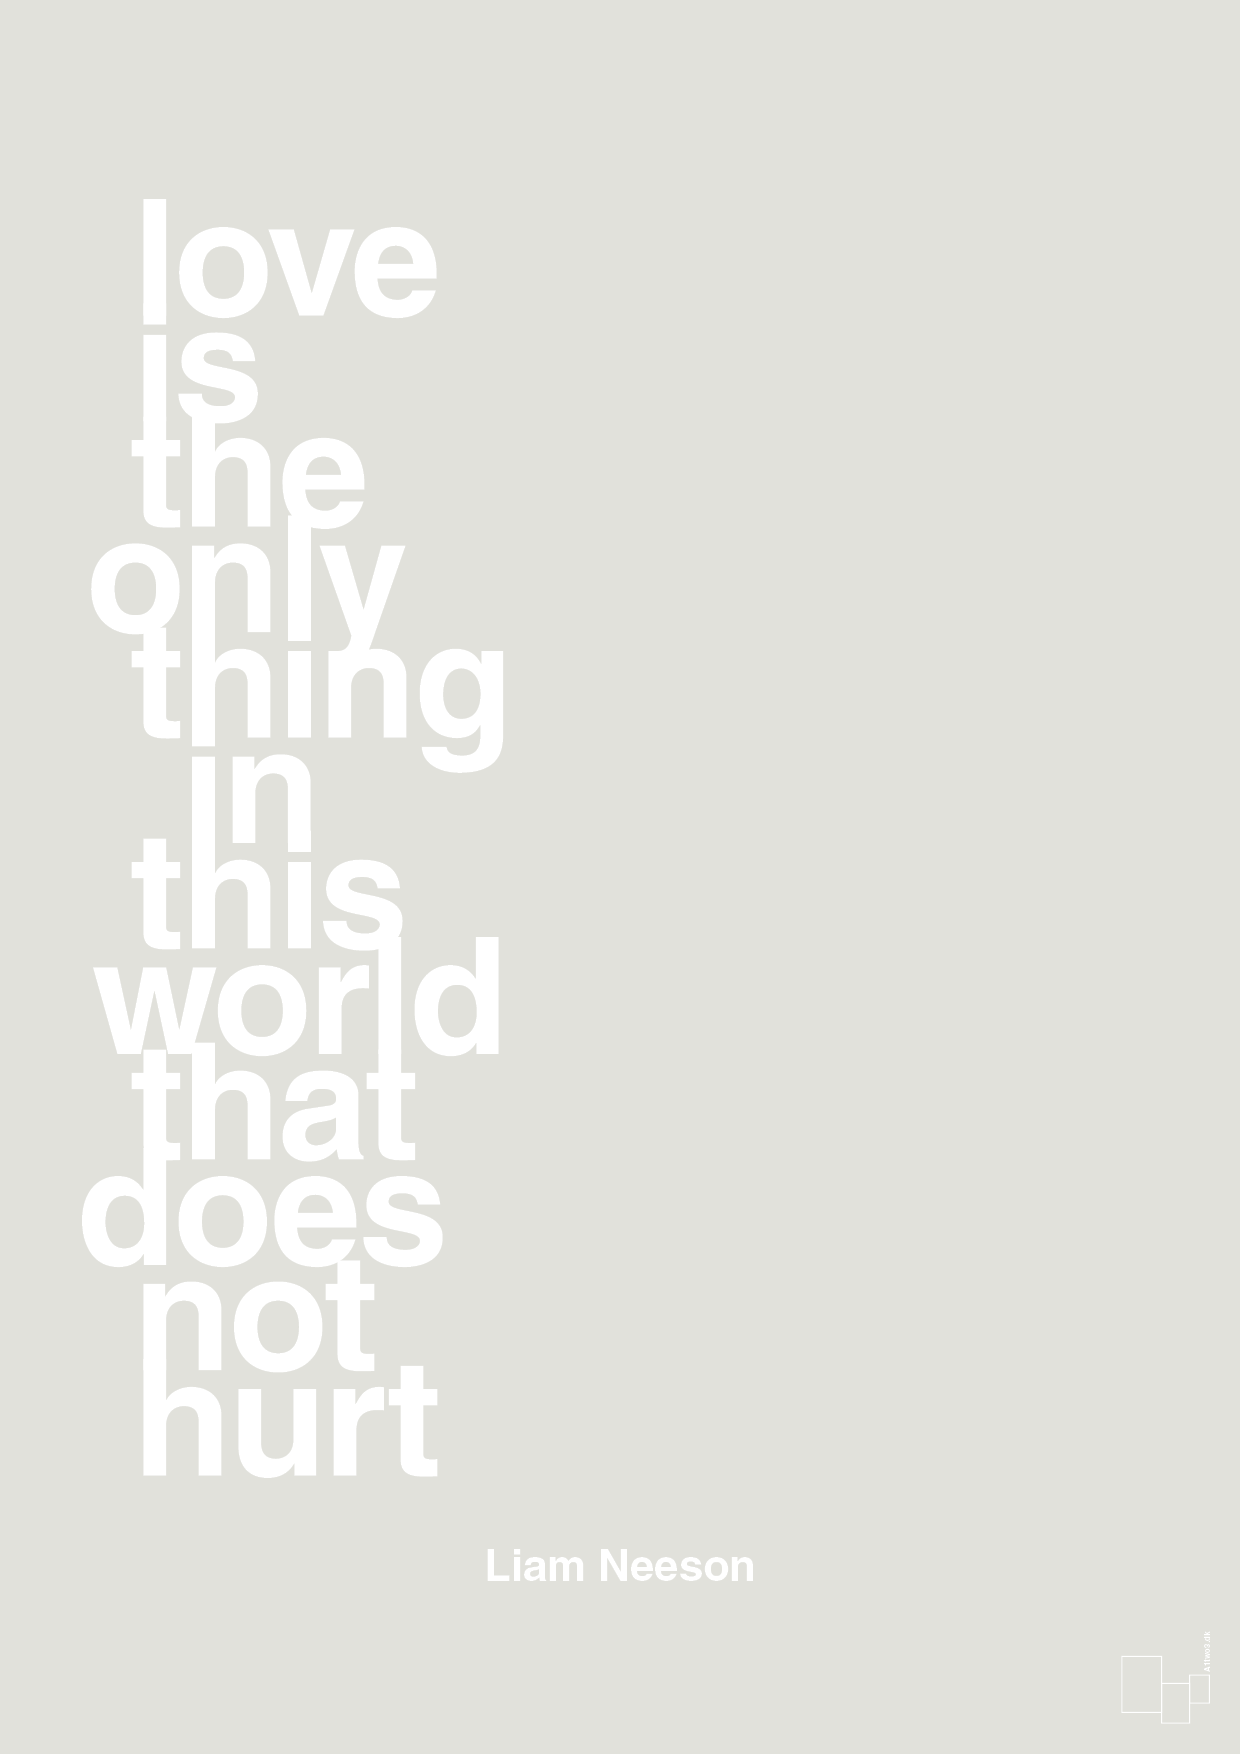 love is the only thing in this world that does not hurt - Plakat med Citater i Painters White